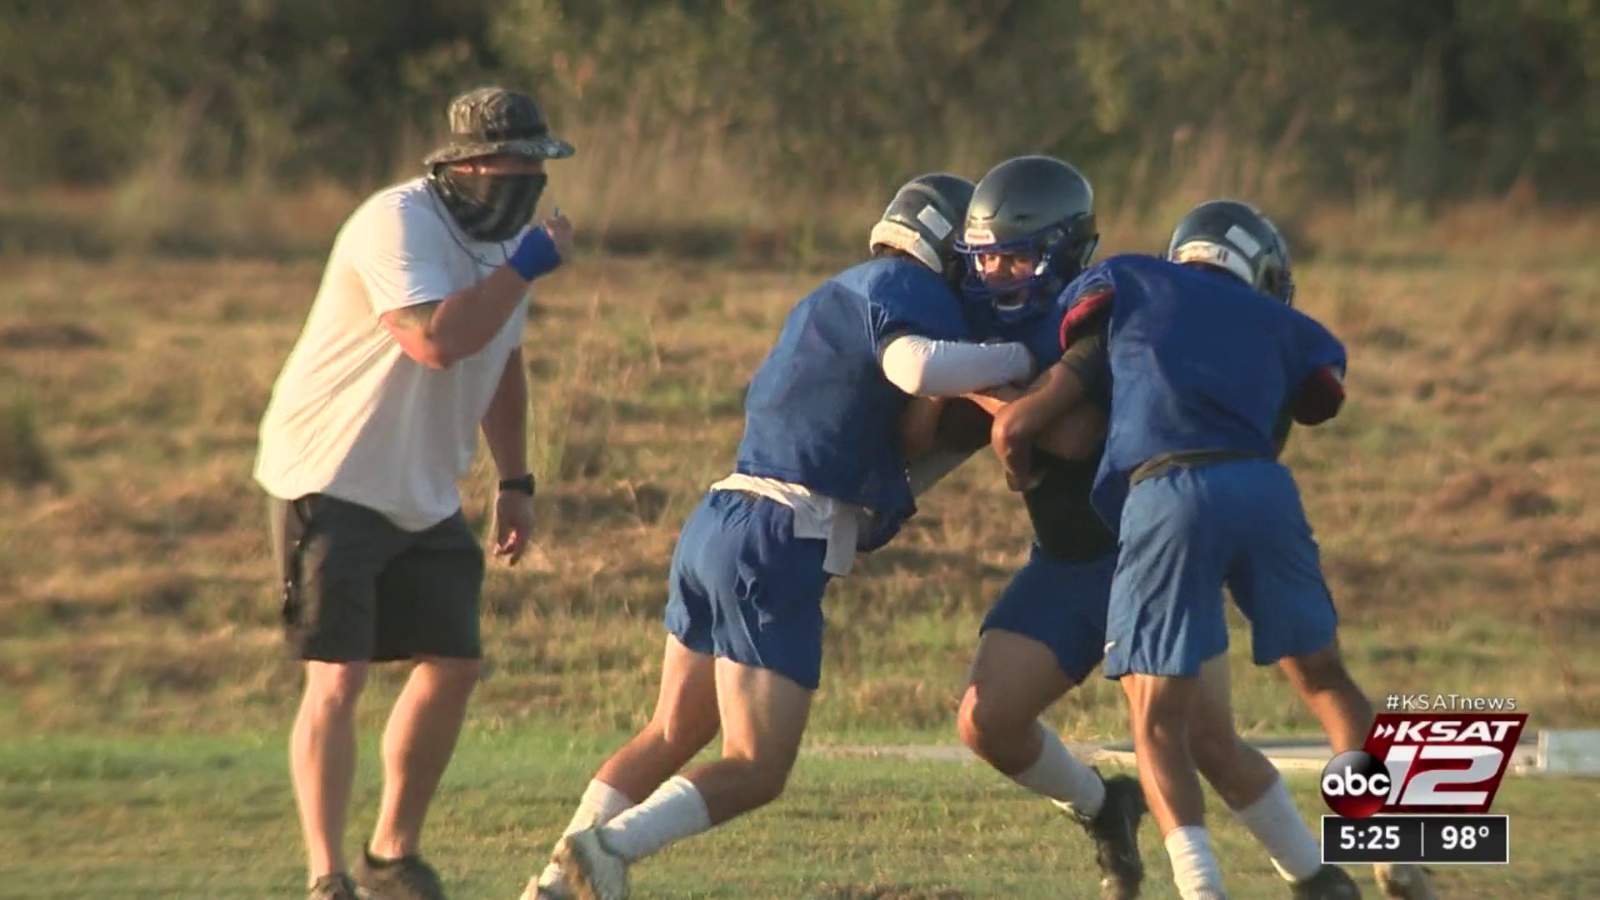 Natalia football relying on experience while adjusting to safety regulations